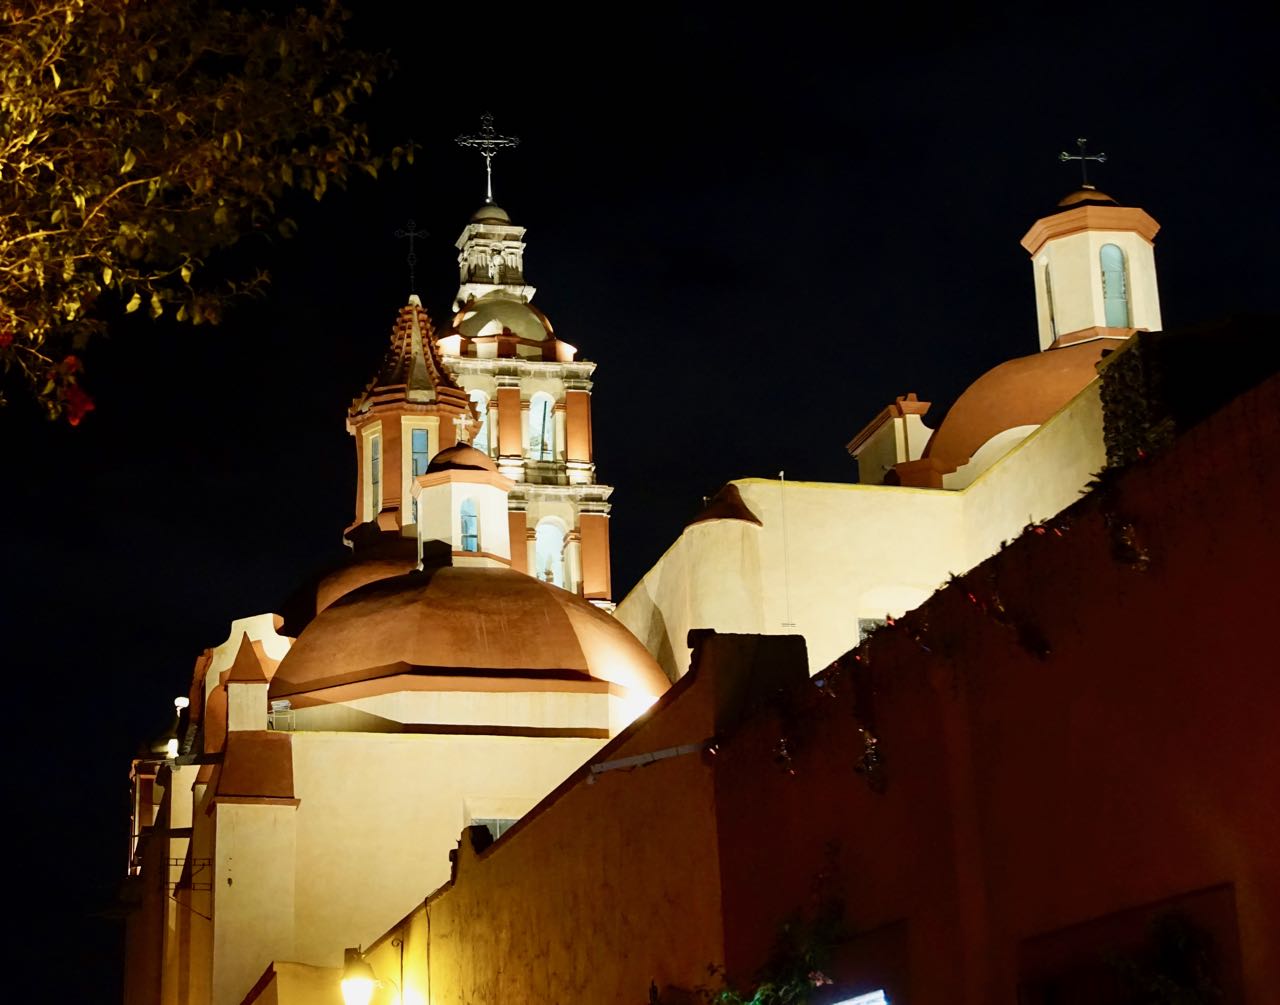 One of the churches in Queretaro